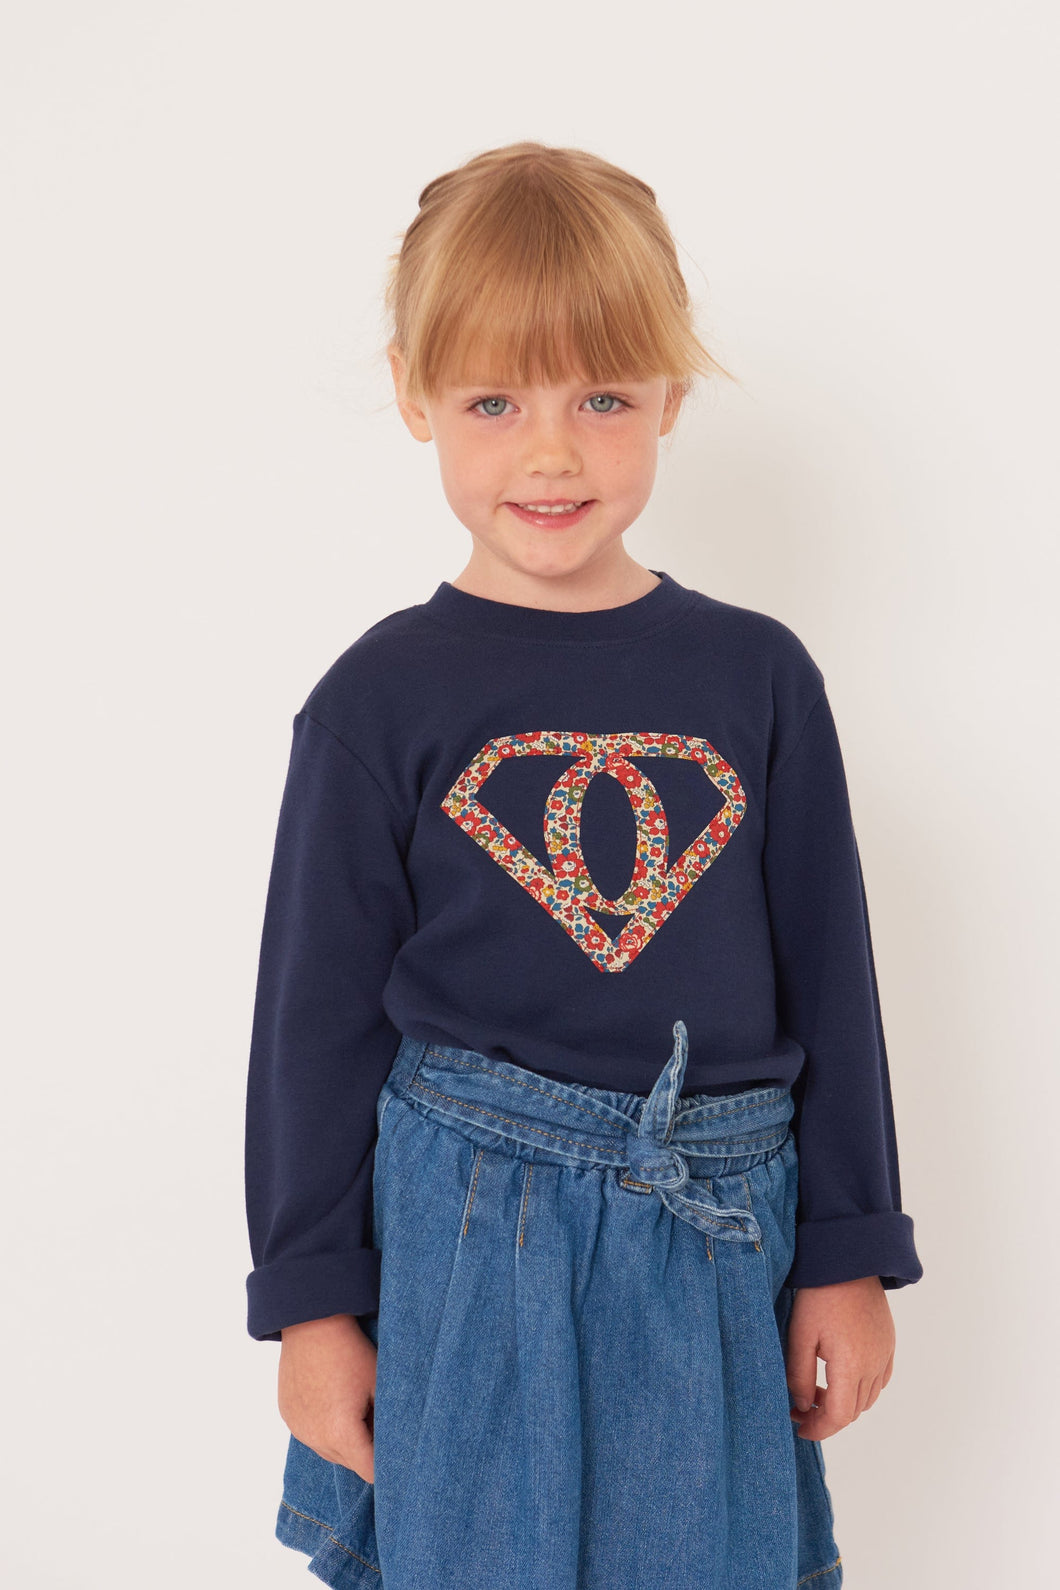 Magnificent Stanley Tee Superhero Girl T-Shirt in choice of Liberty Print